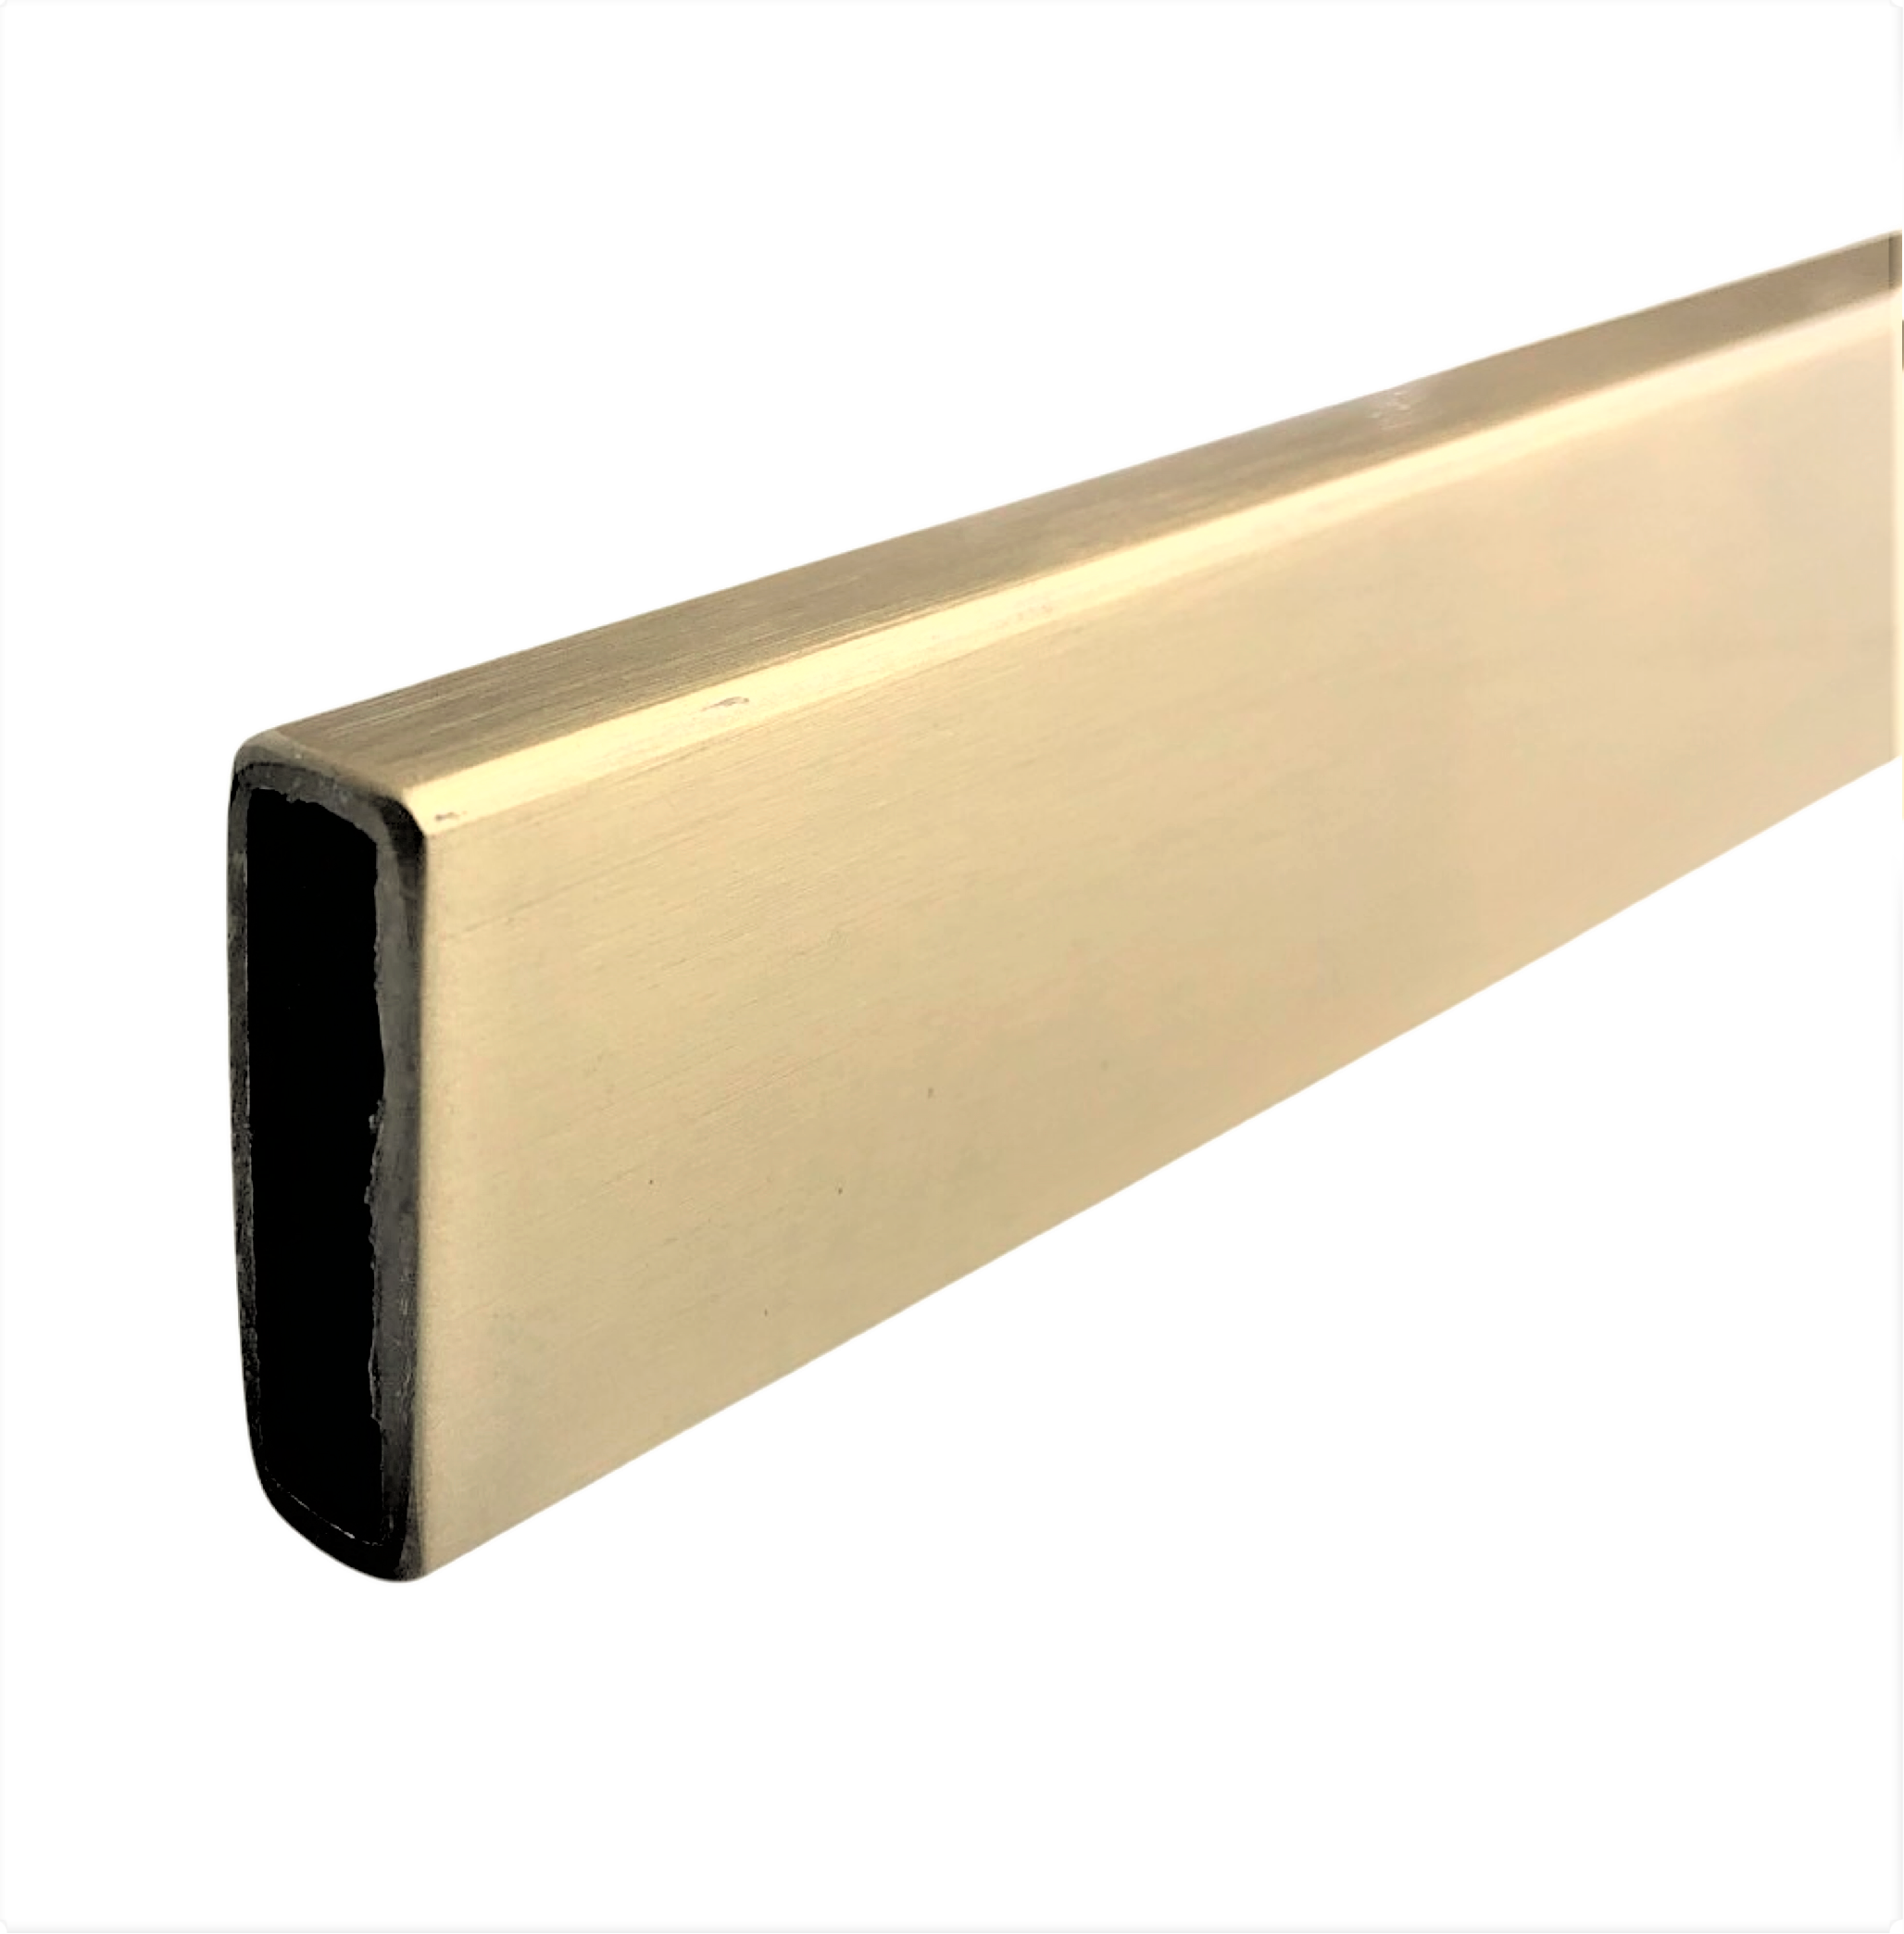 Top Rail Track 2500mm-Blank no Holes (Brushed Gold)